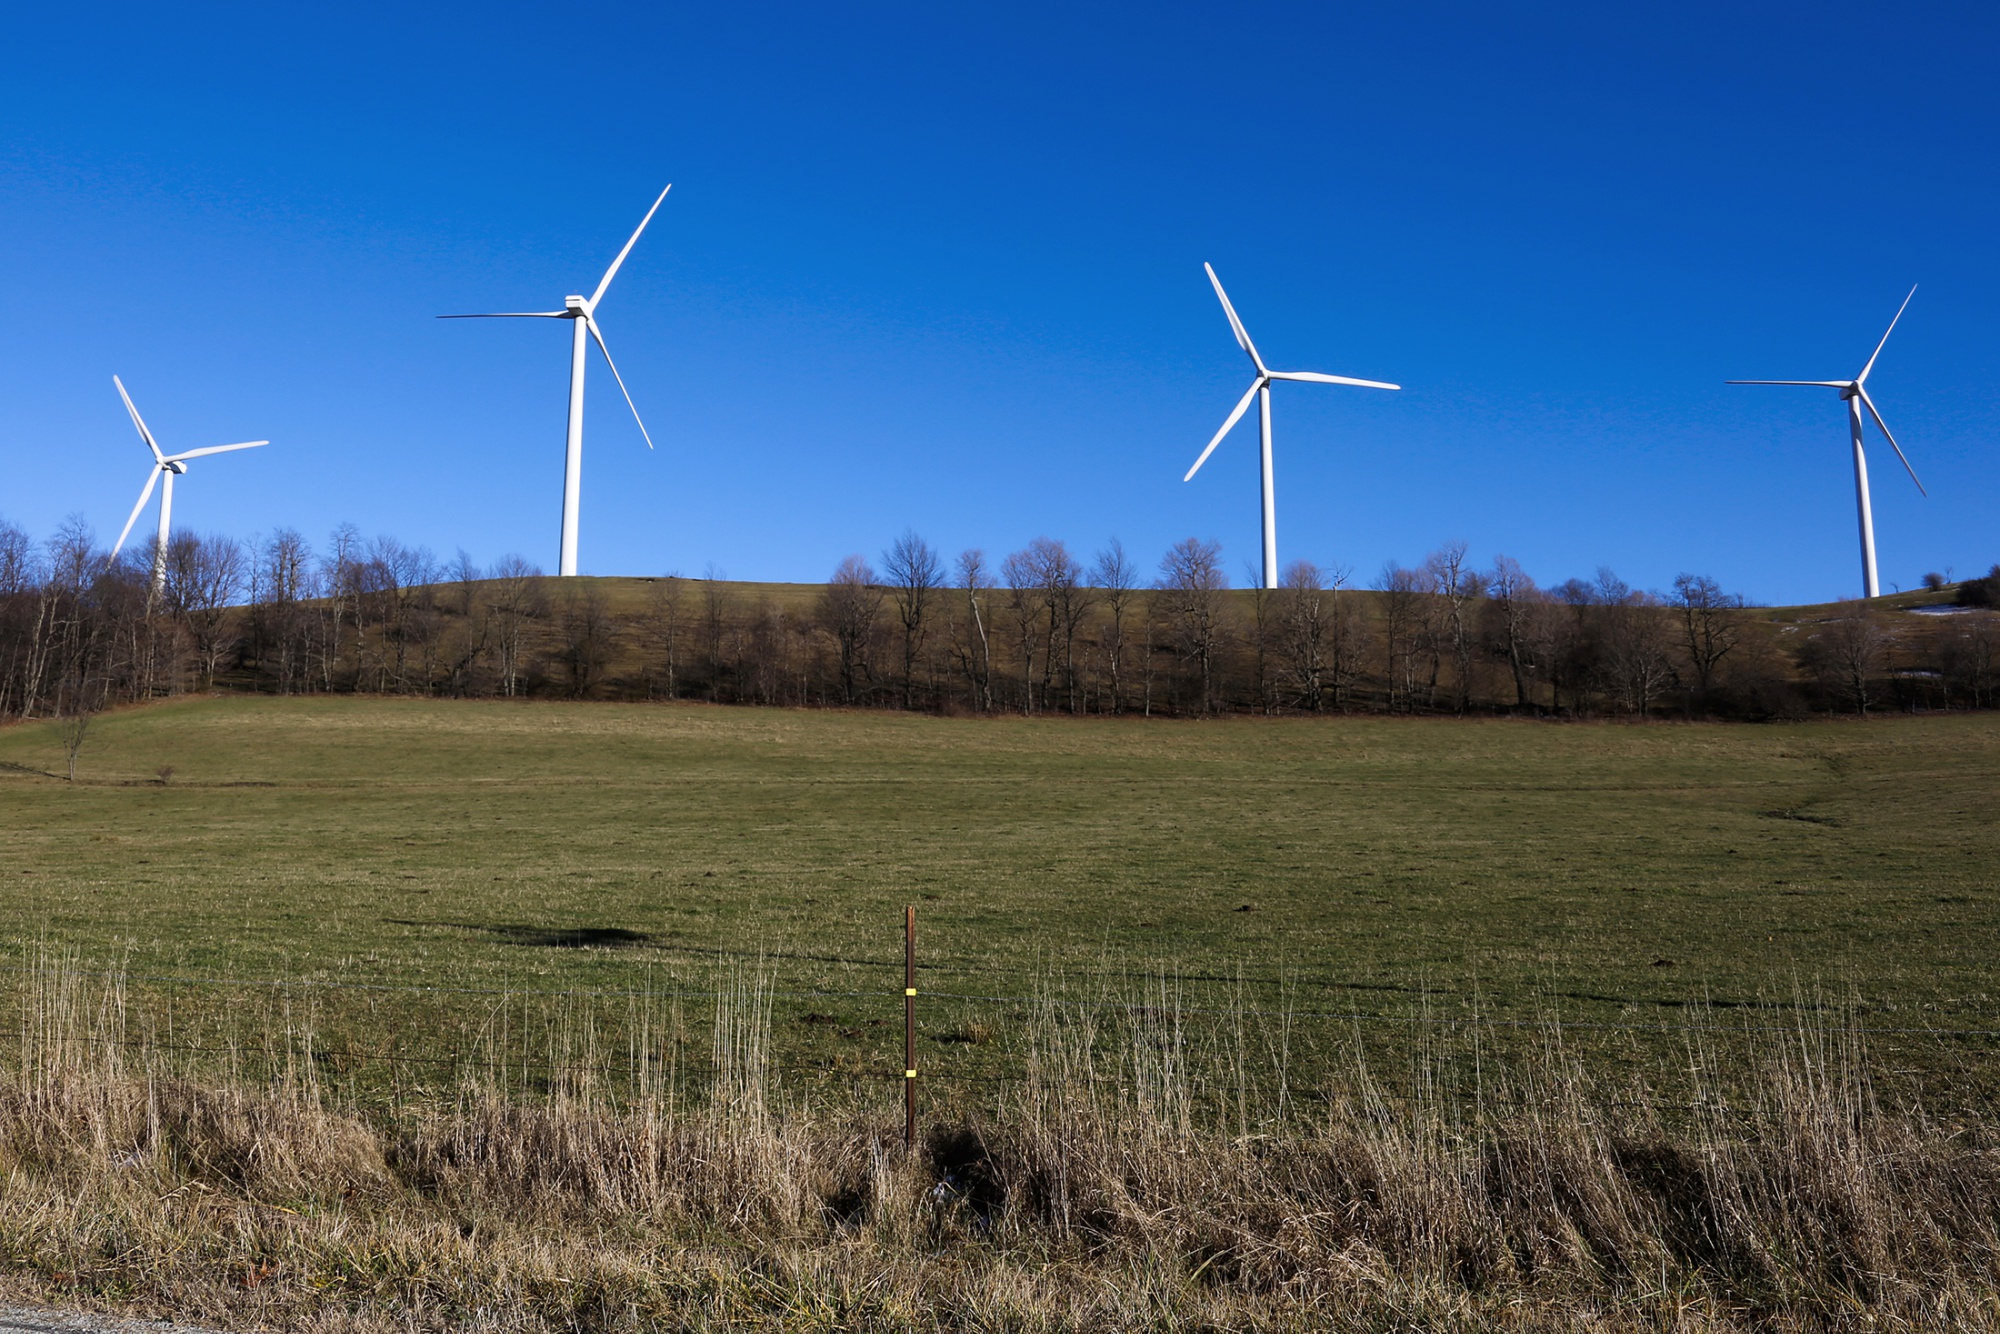 relates to The World’s Only $100 Billion Utility Owes Its Rise To Wind Power